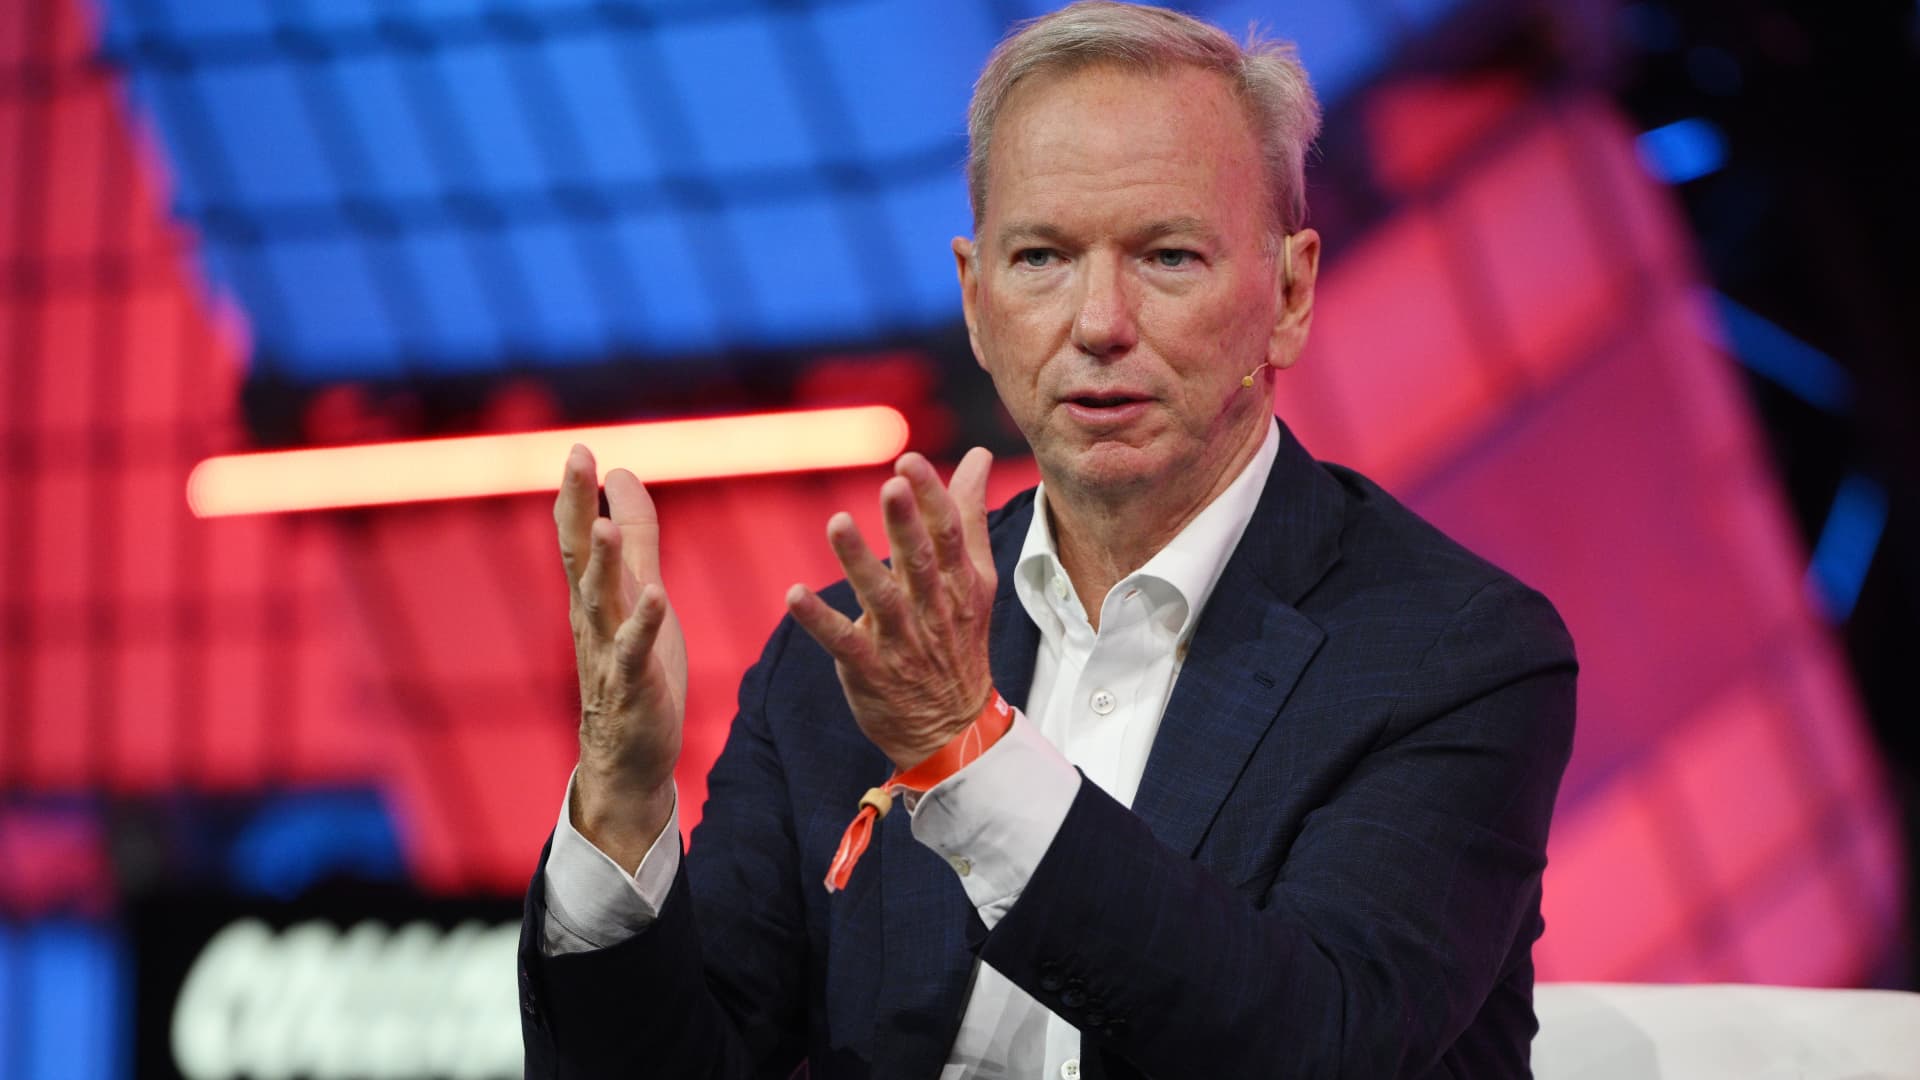 A.I. poses existential risk of people being ‘harmed or killed,’ ex-Google CEO Eric Schmidt says